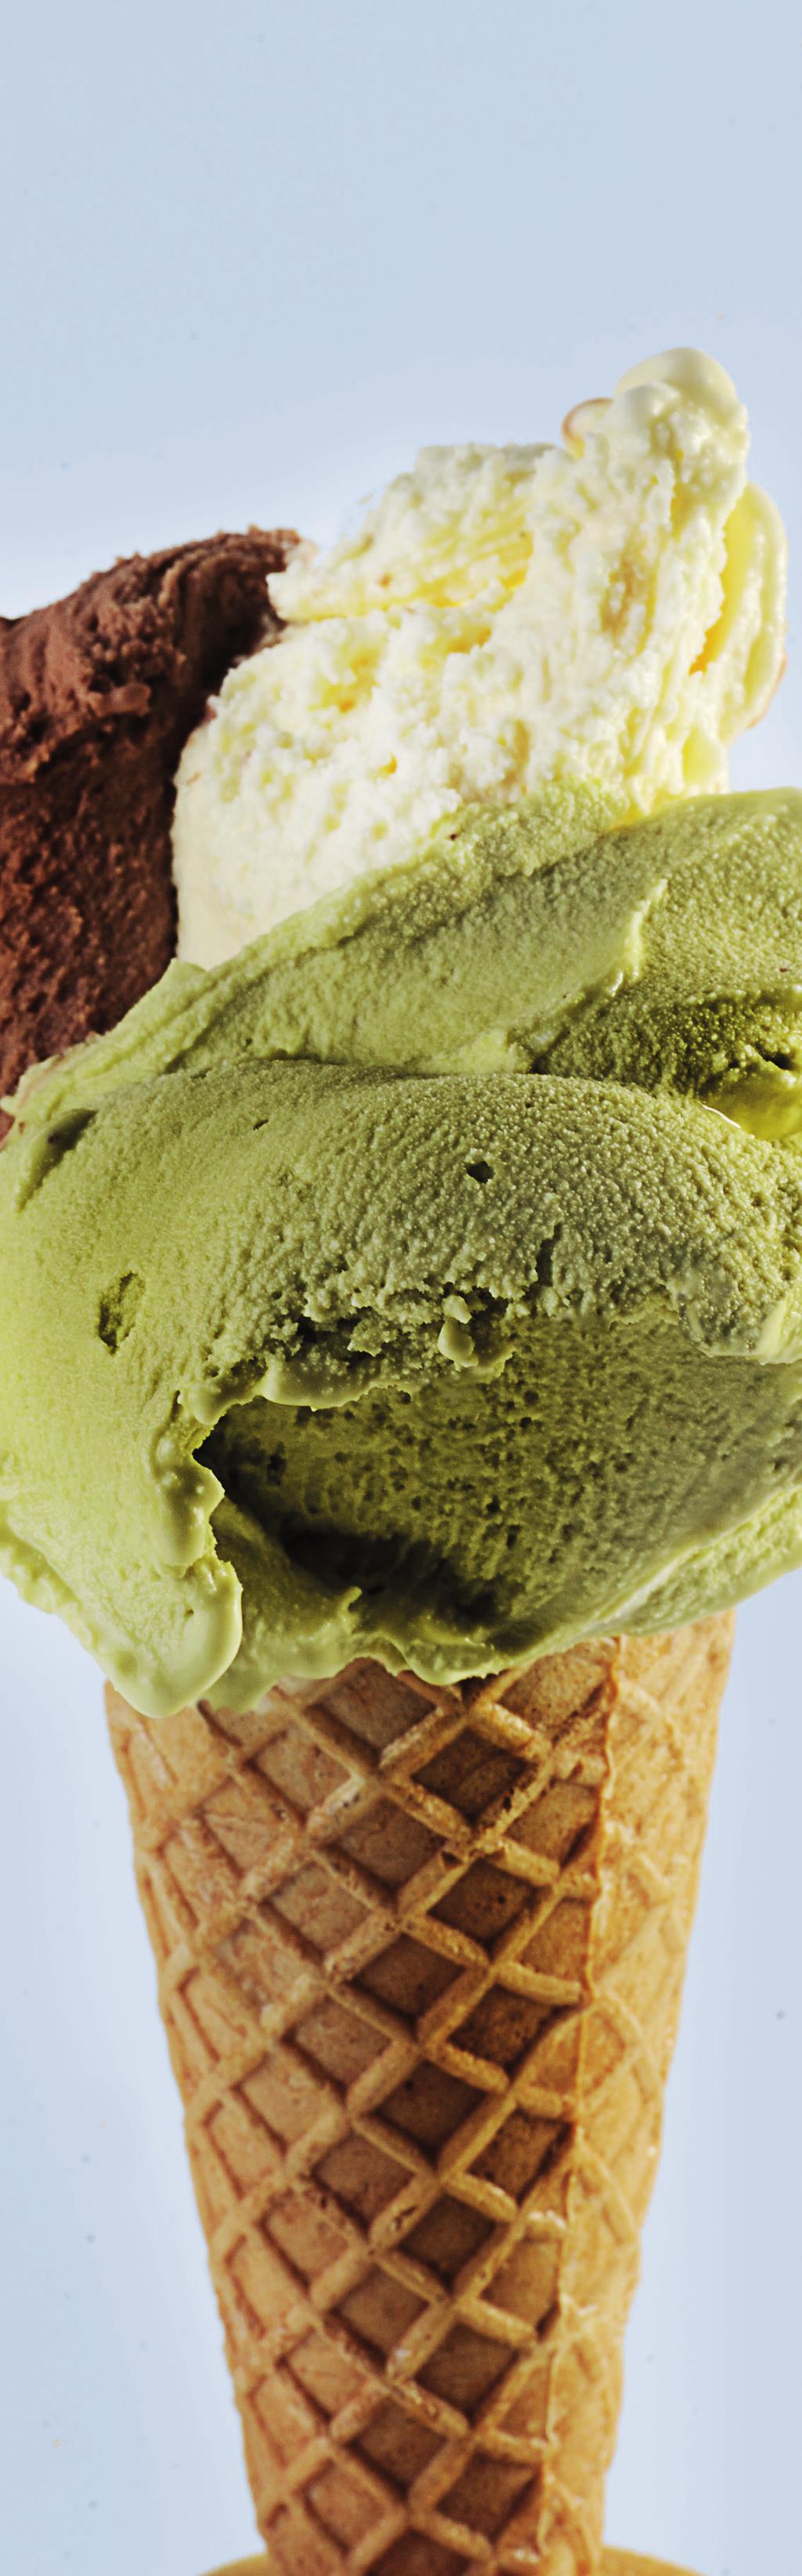 sales & support Carpigiani UK offers a nationwide service of highly experienced and dedicated experts who provide specialist knowledge of the world s leading ice cream and gelato making equipment.